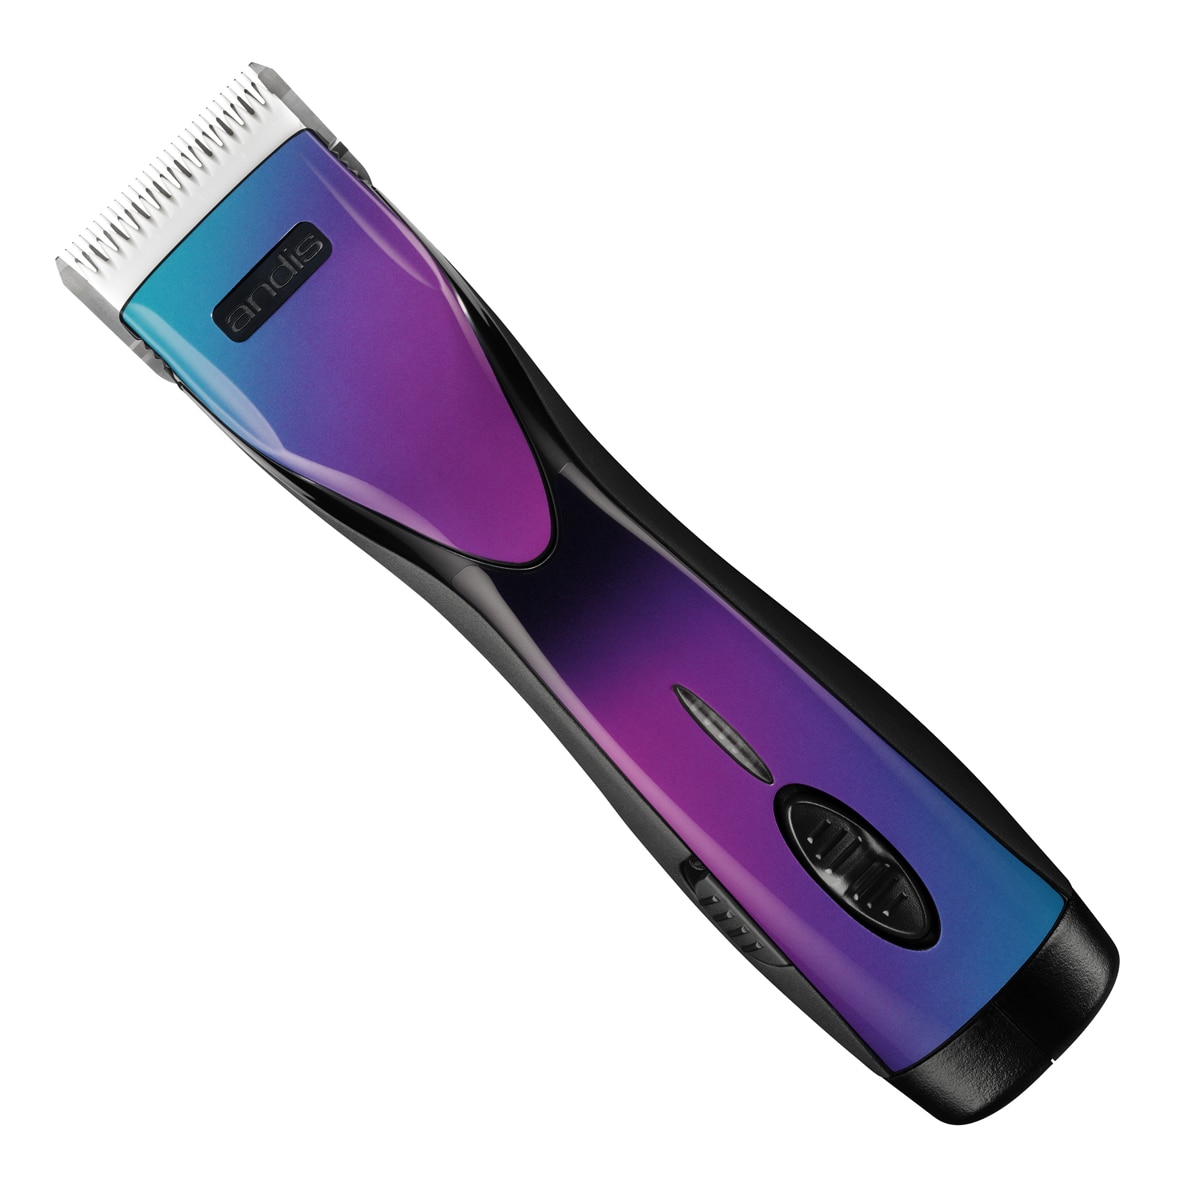 andis clippers andis pulse zr ii cordless clipper